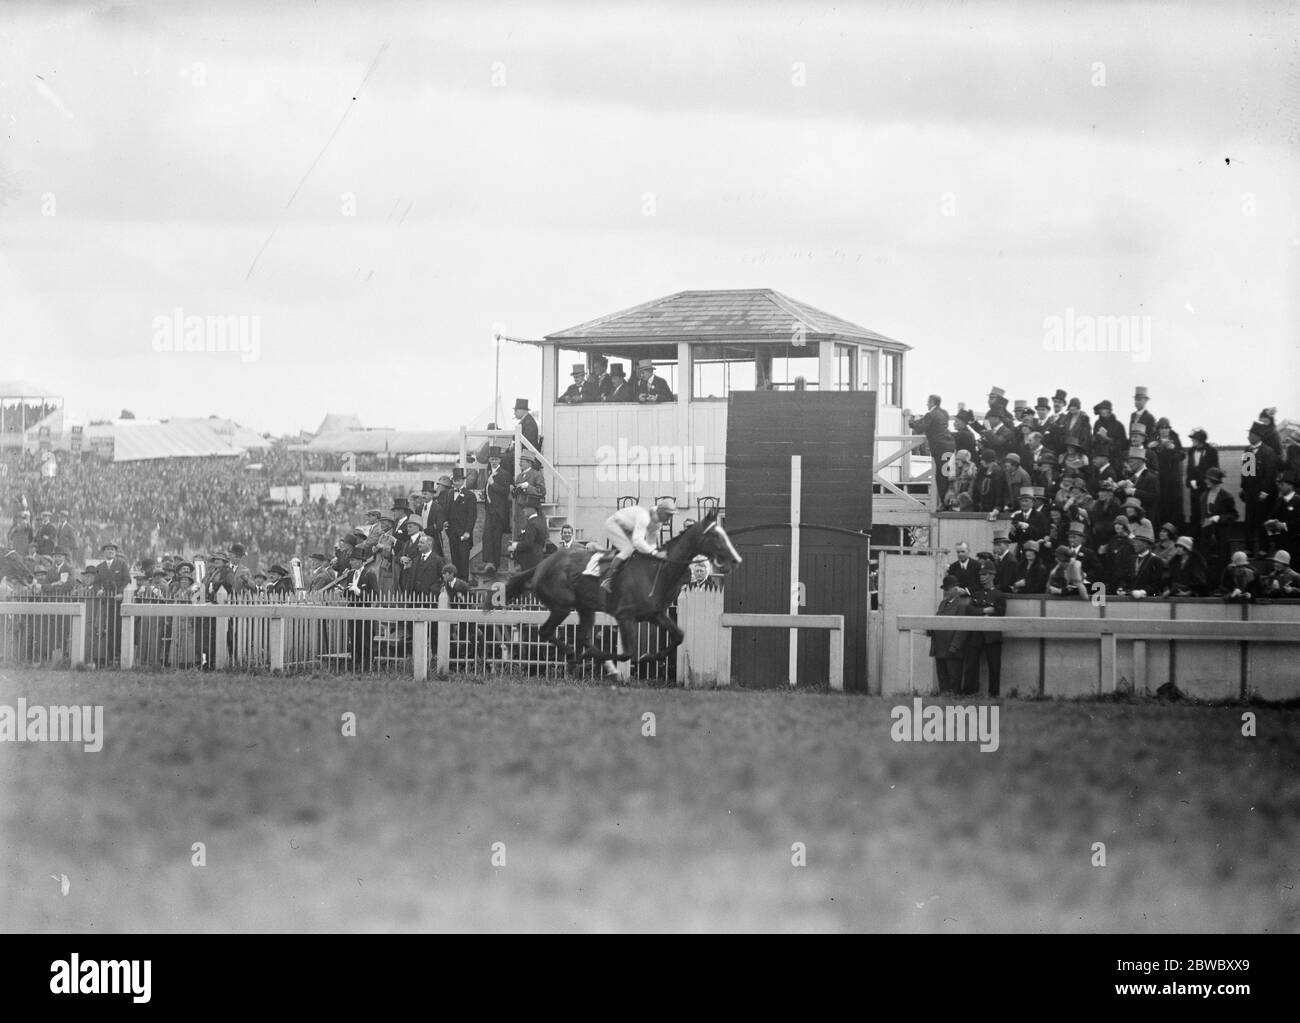 Lord Astor ' s ' Saucy Sue ' , ridden by F Bullock wins the oaks at Epsom The finish of the race 29 May 1925 Stock Photo